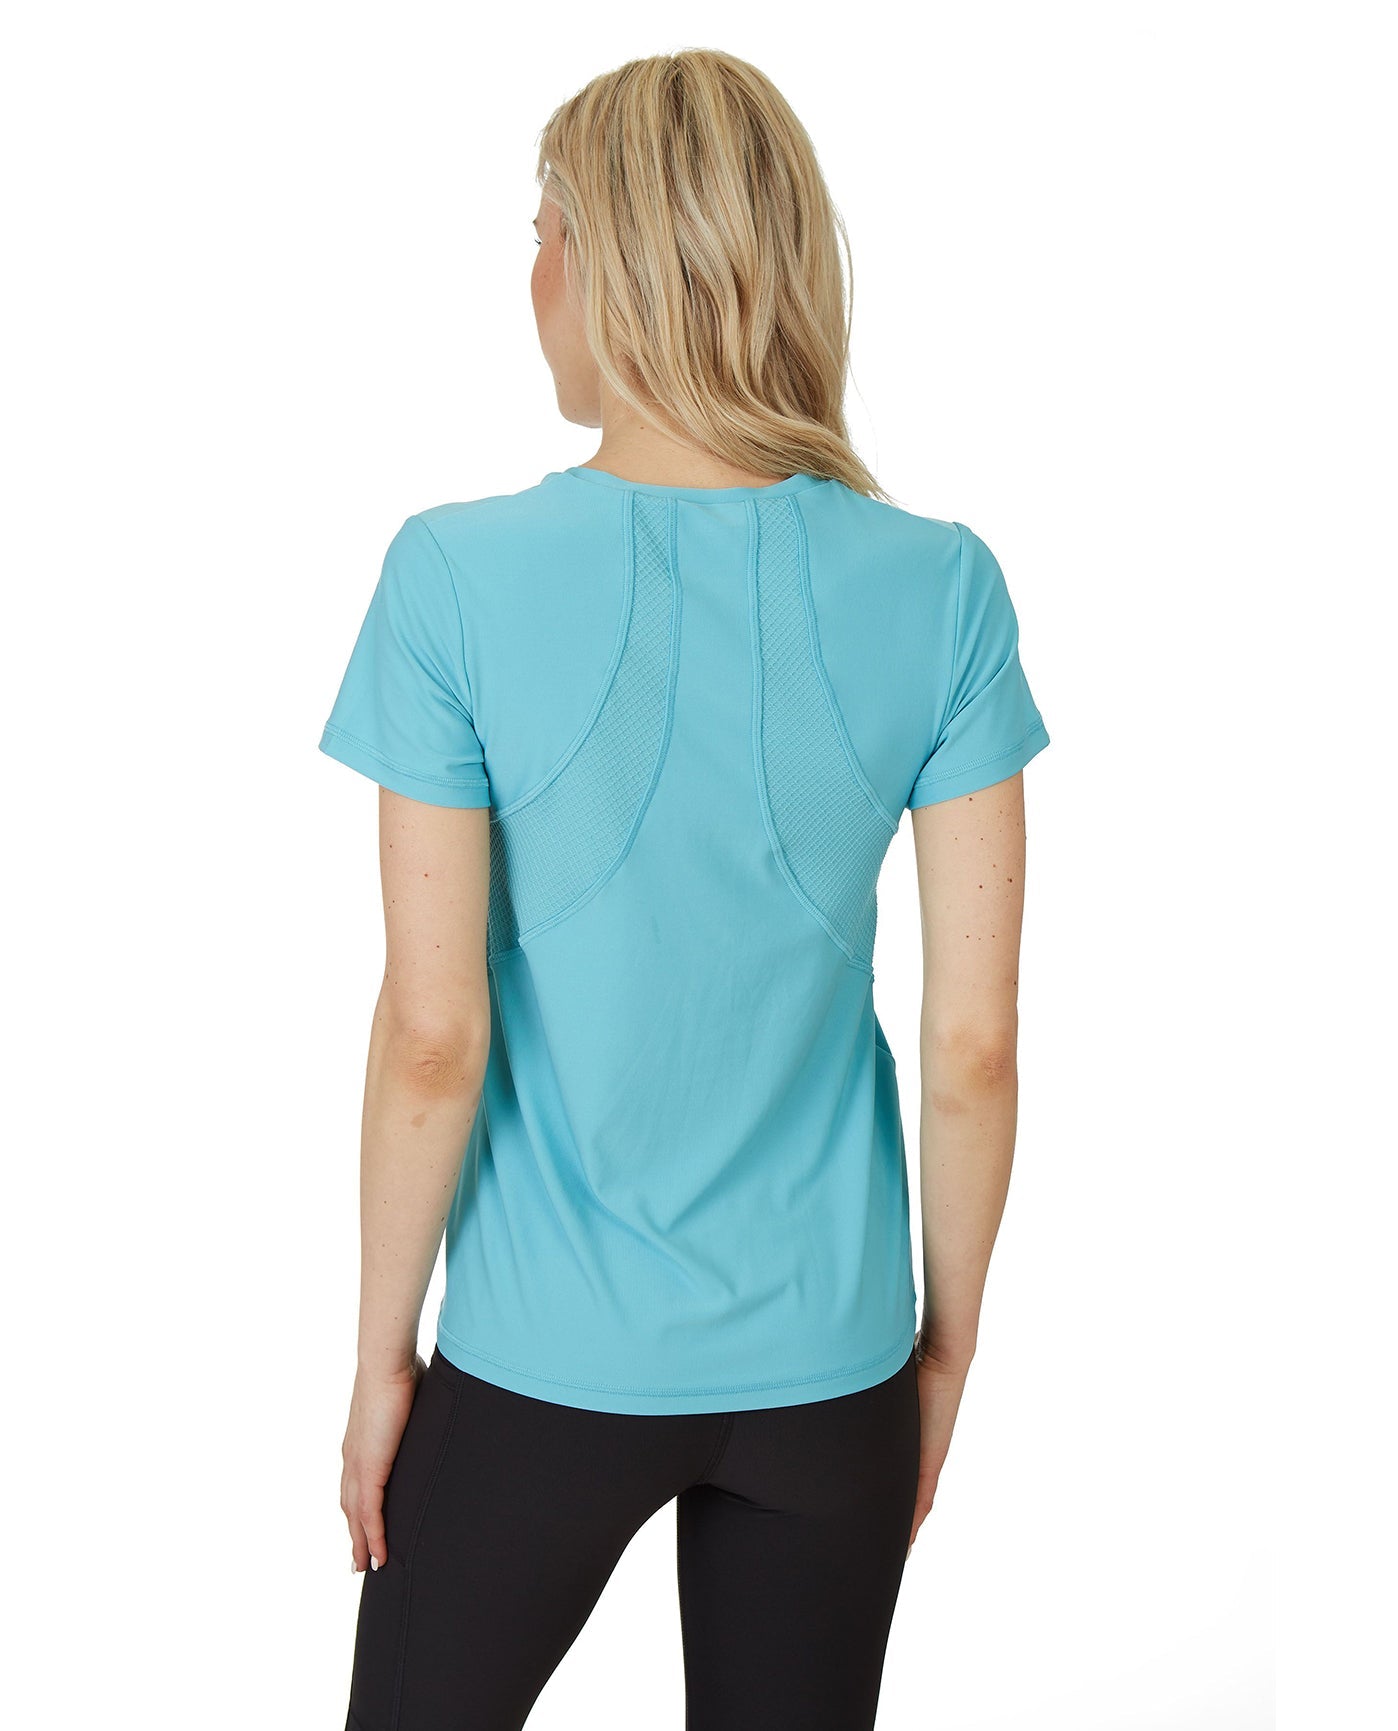 Back View Of X by Gottex Honey Comb Loose Fit Short Sleeve V-Neck Top | XGX BLUE